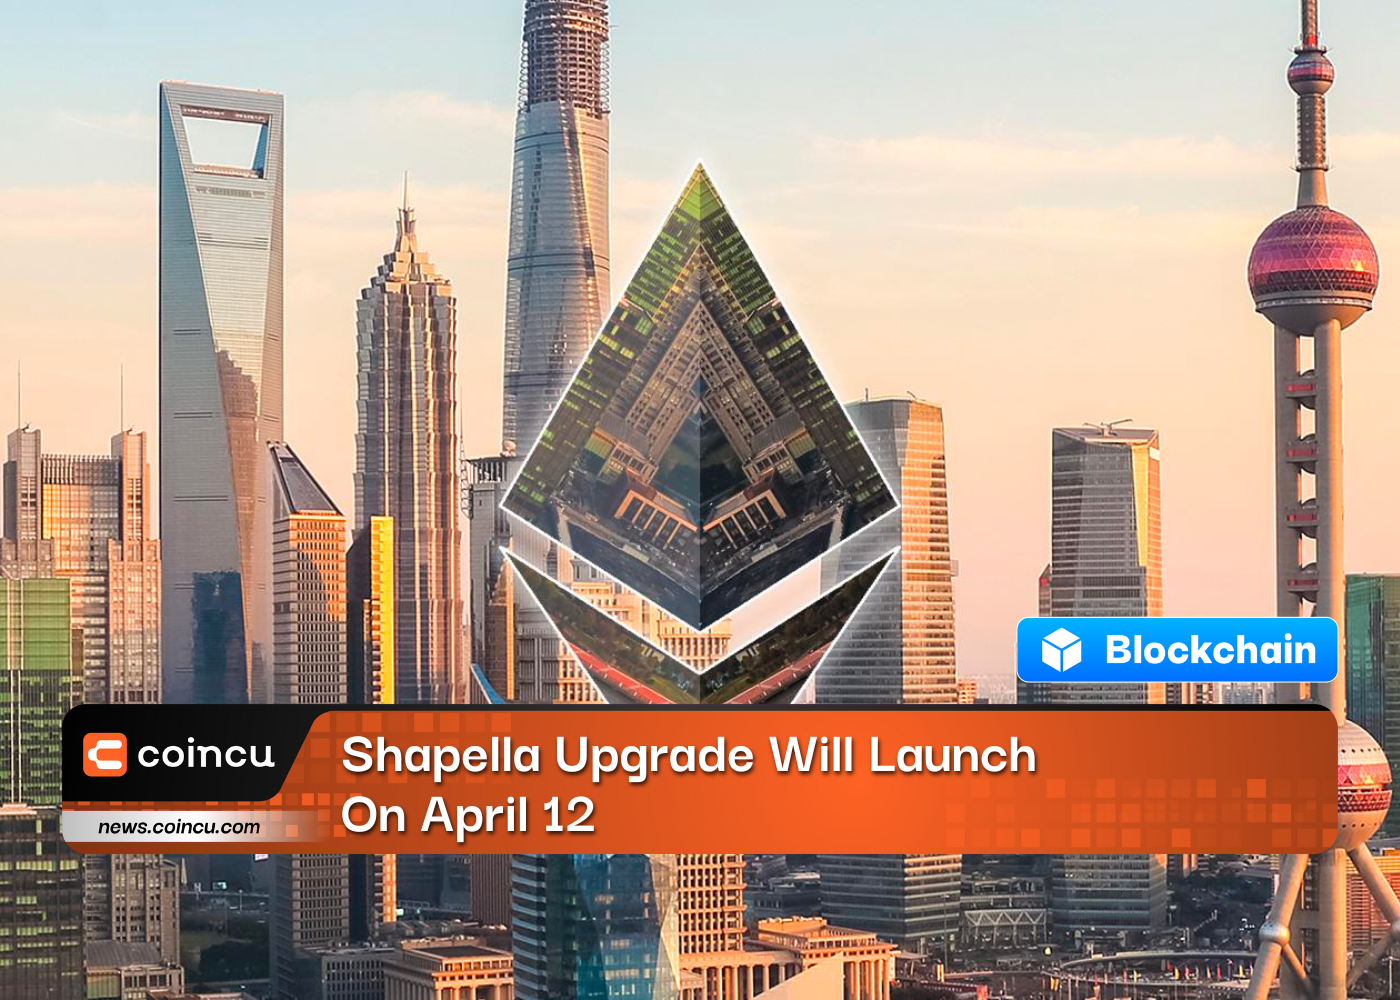 Shapella Upgrade Will Launch On April 12